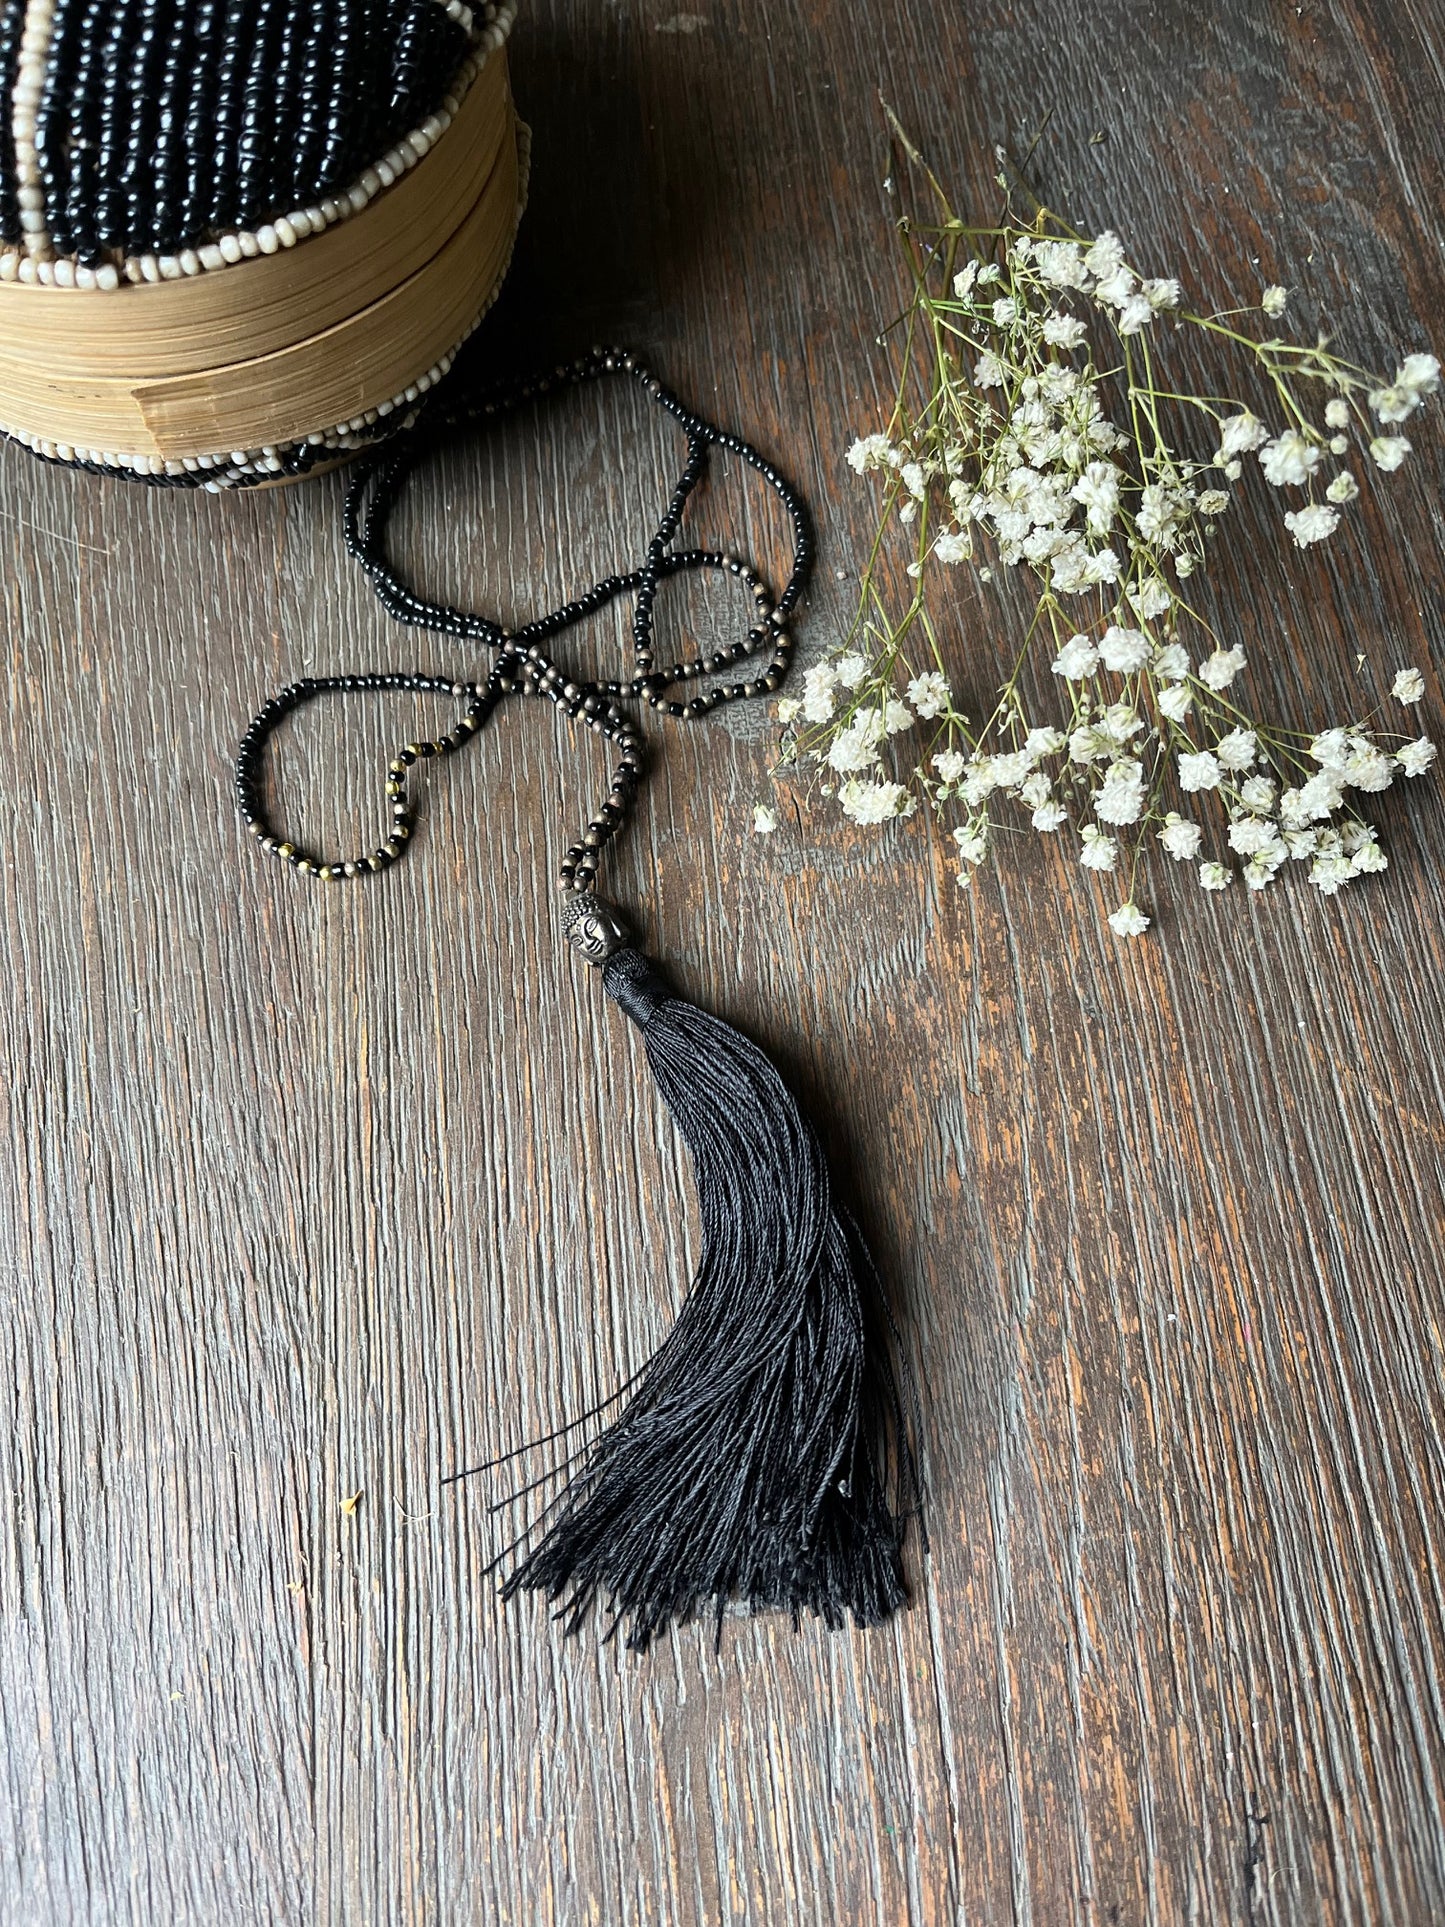 Black Sequined Necklace